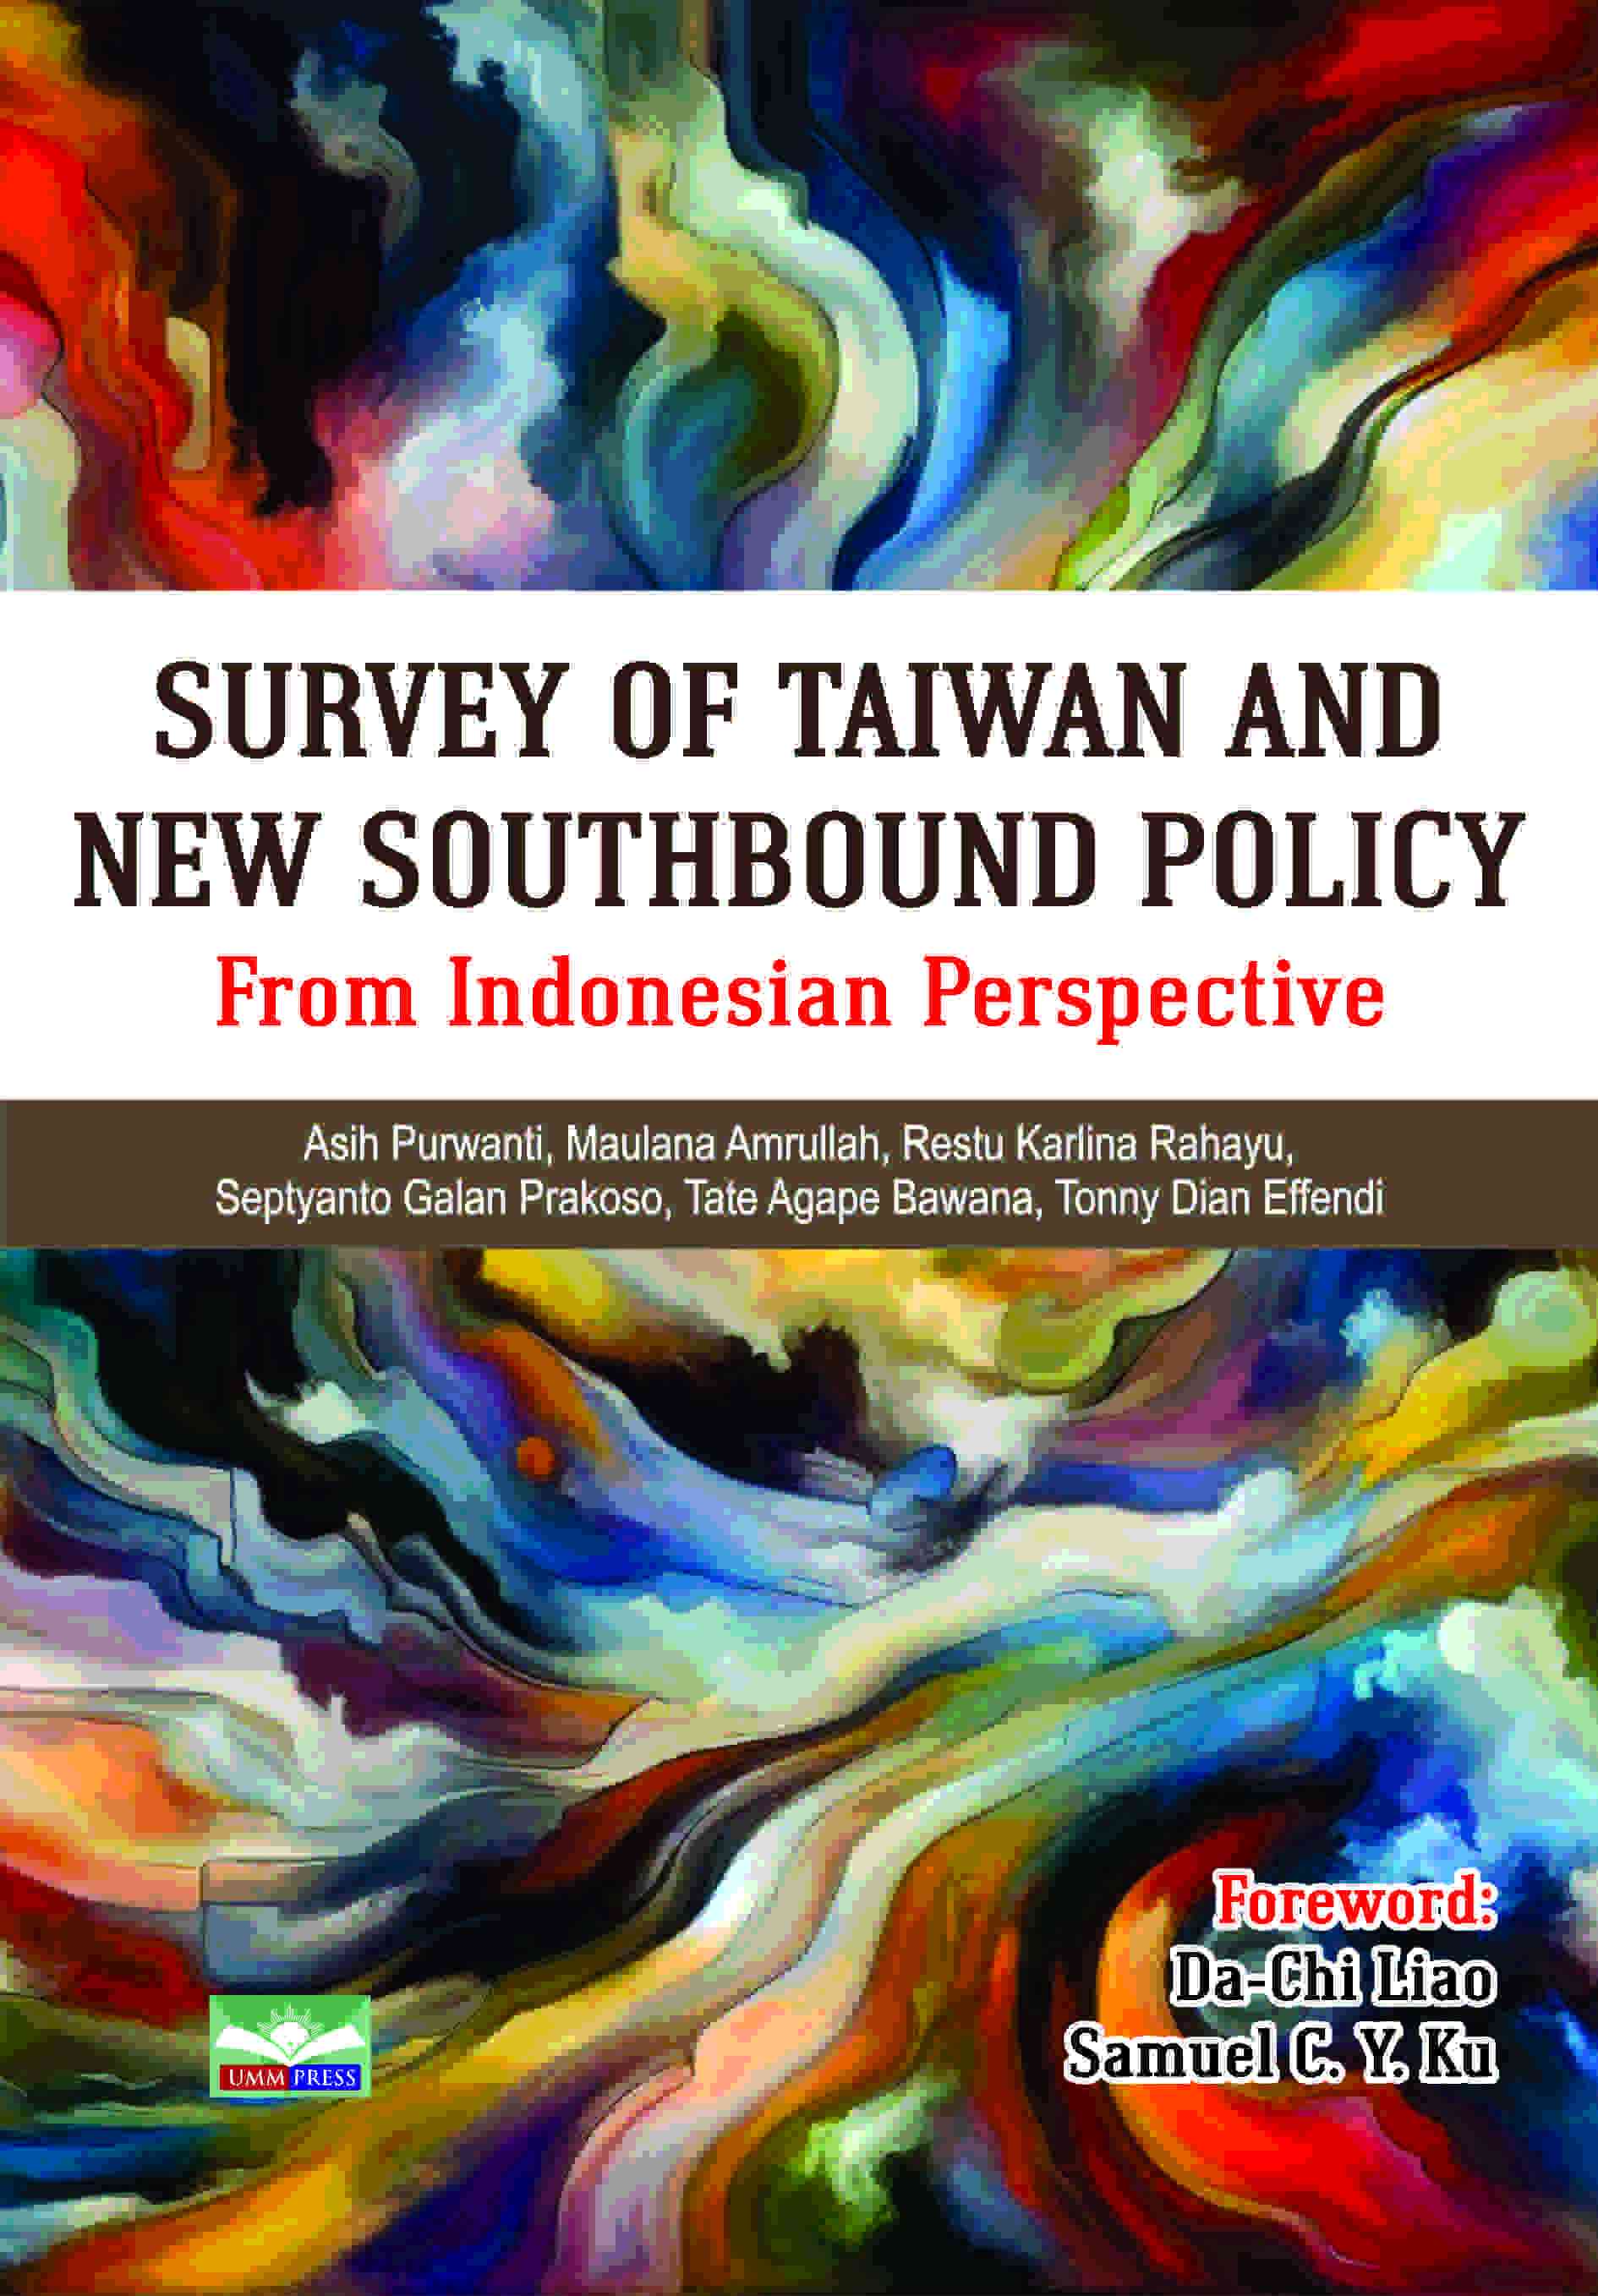 survey-of-taiwan-and-new-southbound-policy-from-indonesian-perspective